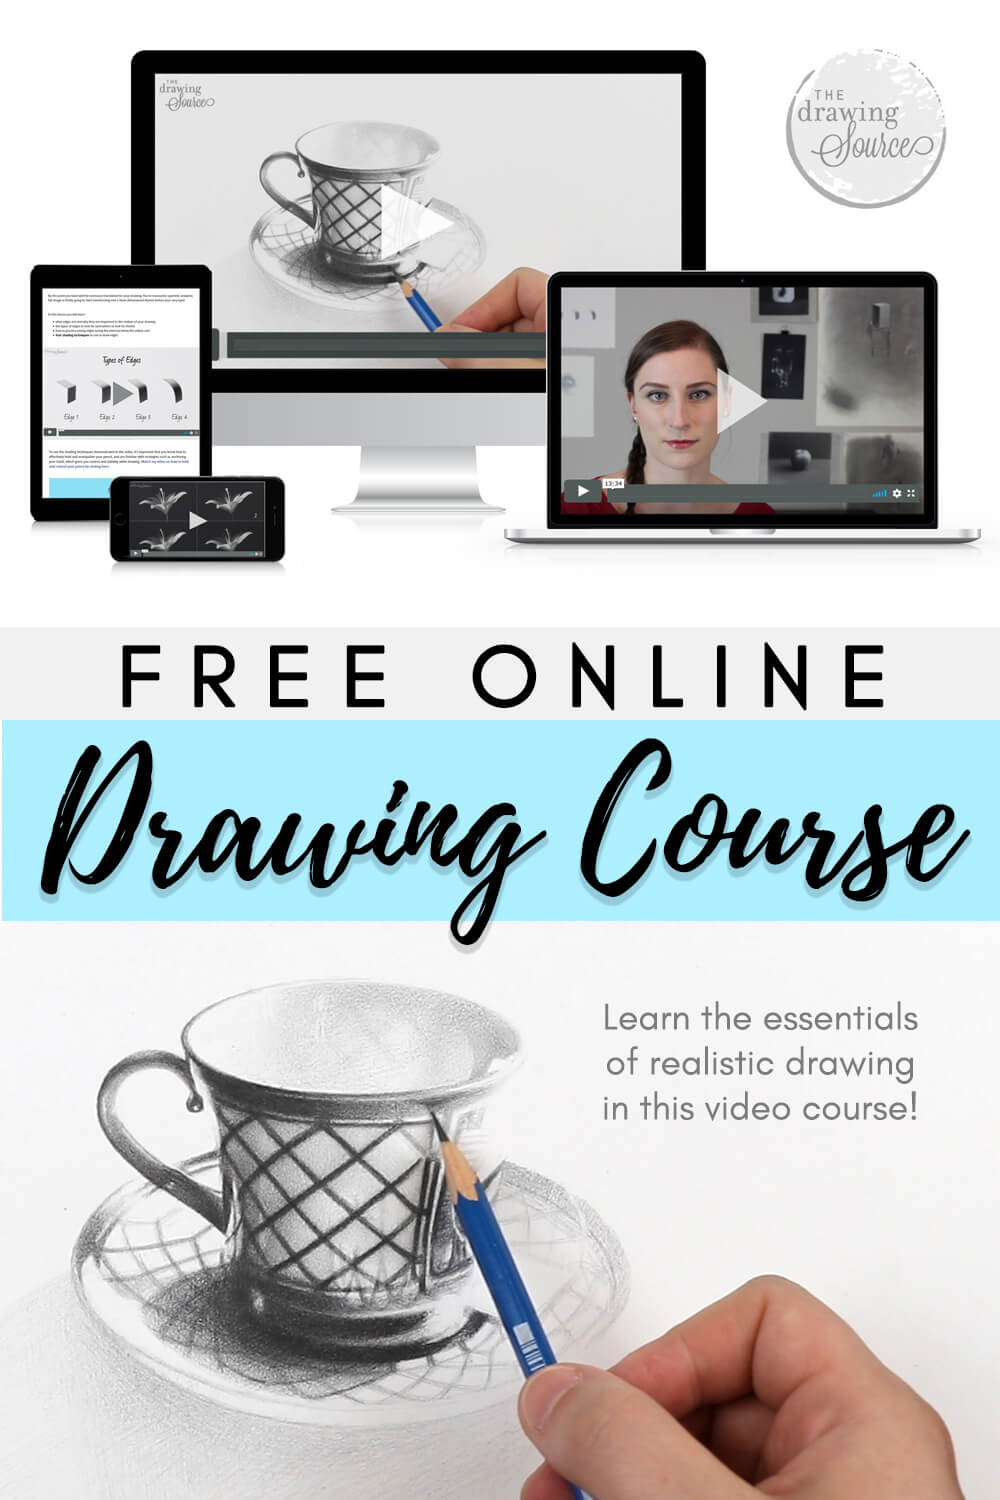 Drawing Course Online Free : The content of the any item here is only